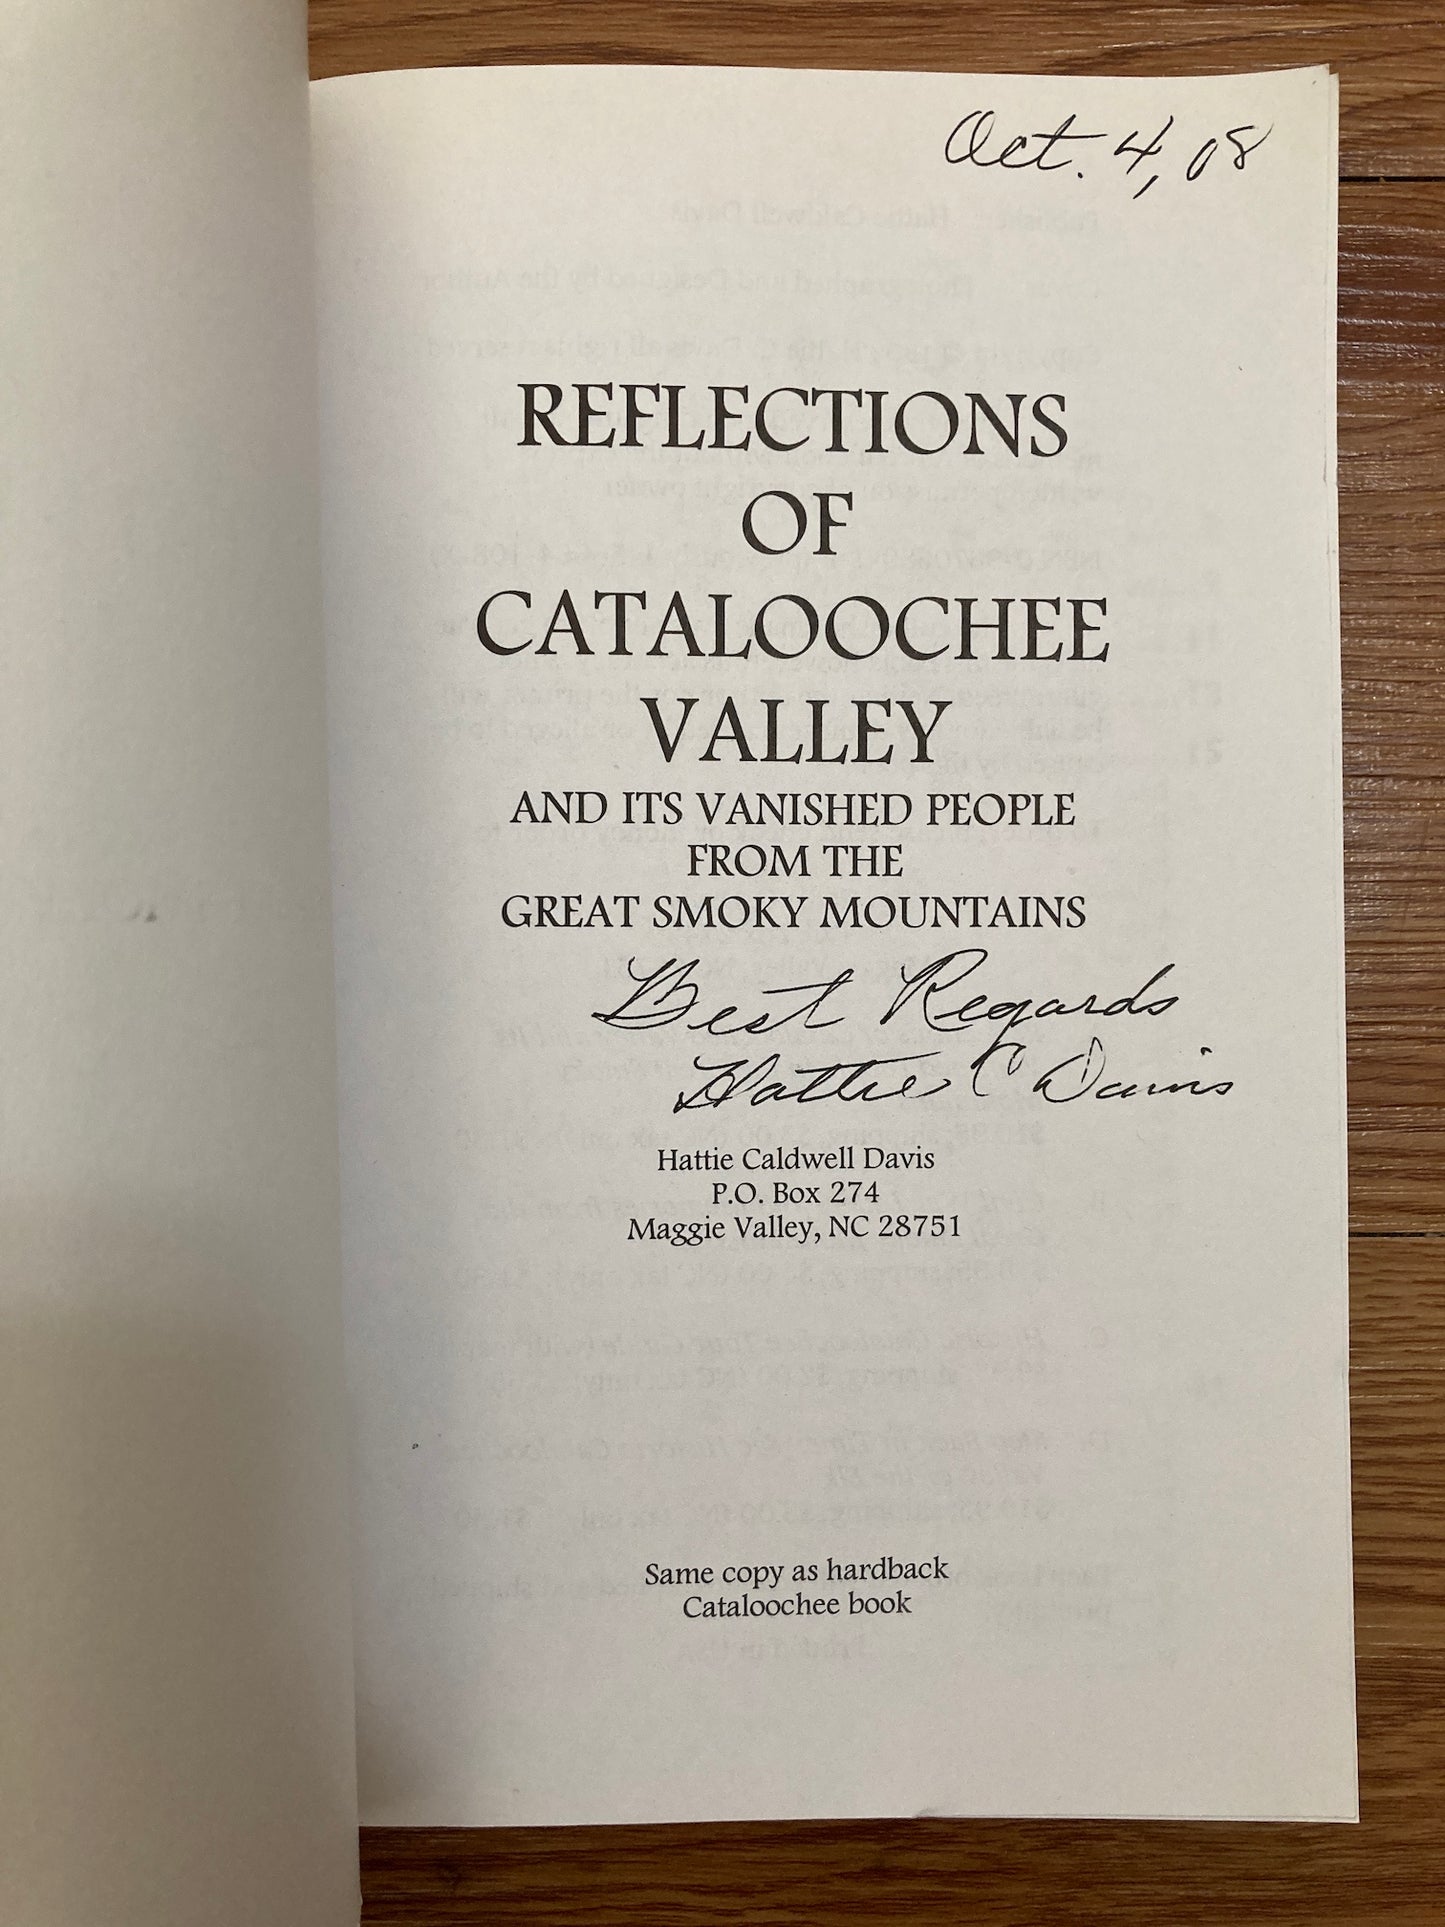 Reflections of Cataloochee Valley and its Vanished People